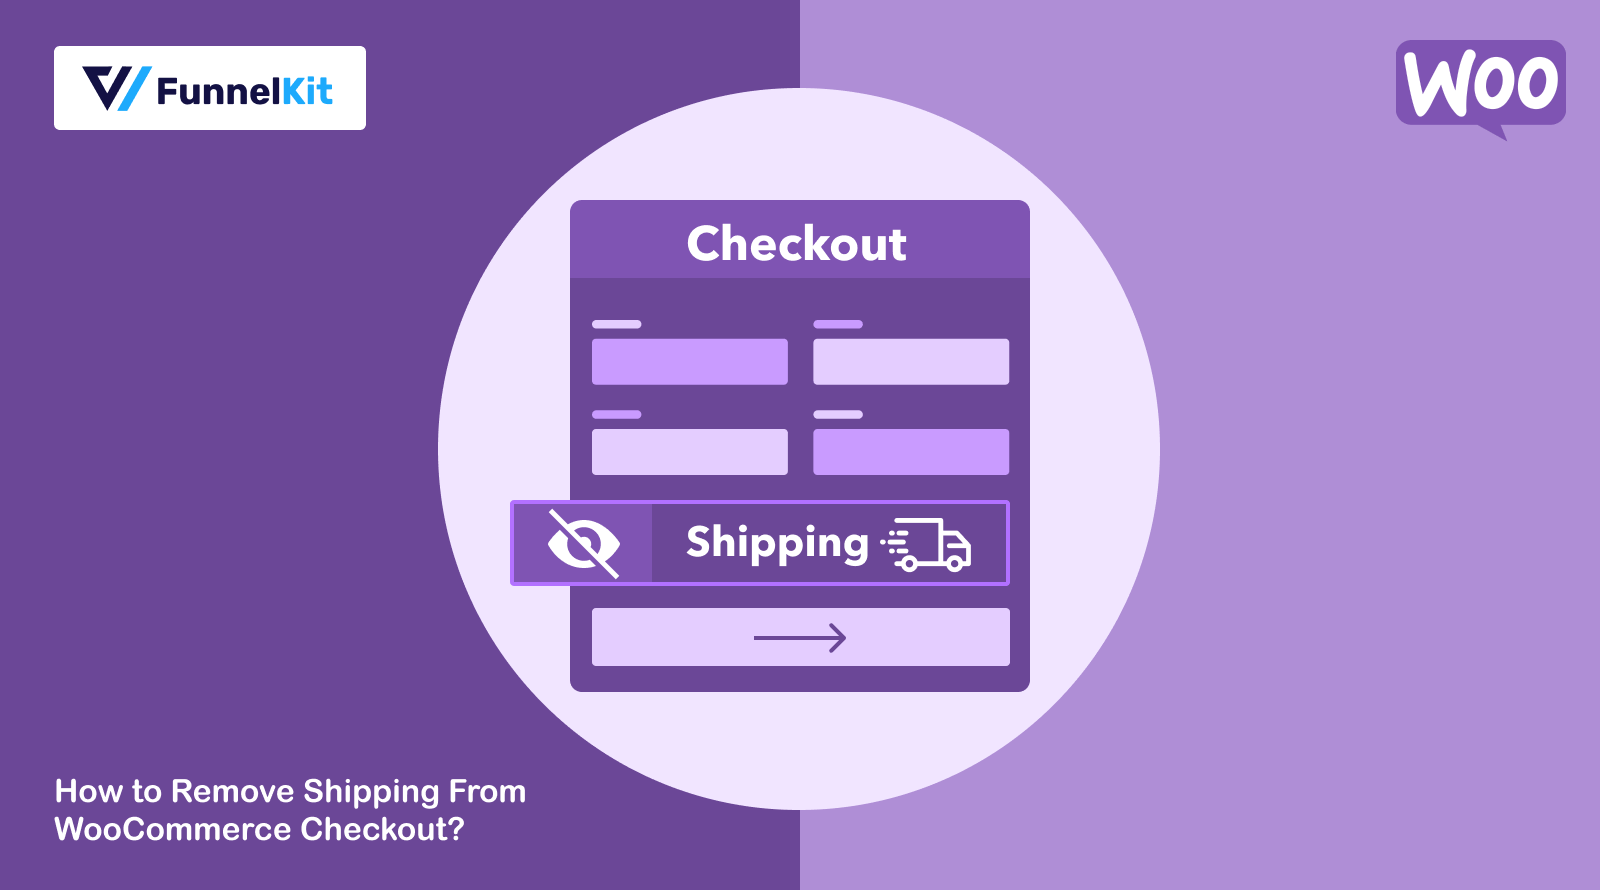 How to Remove Shipping From WooCommerce Checkout